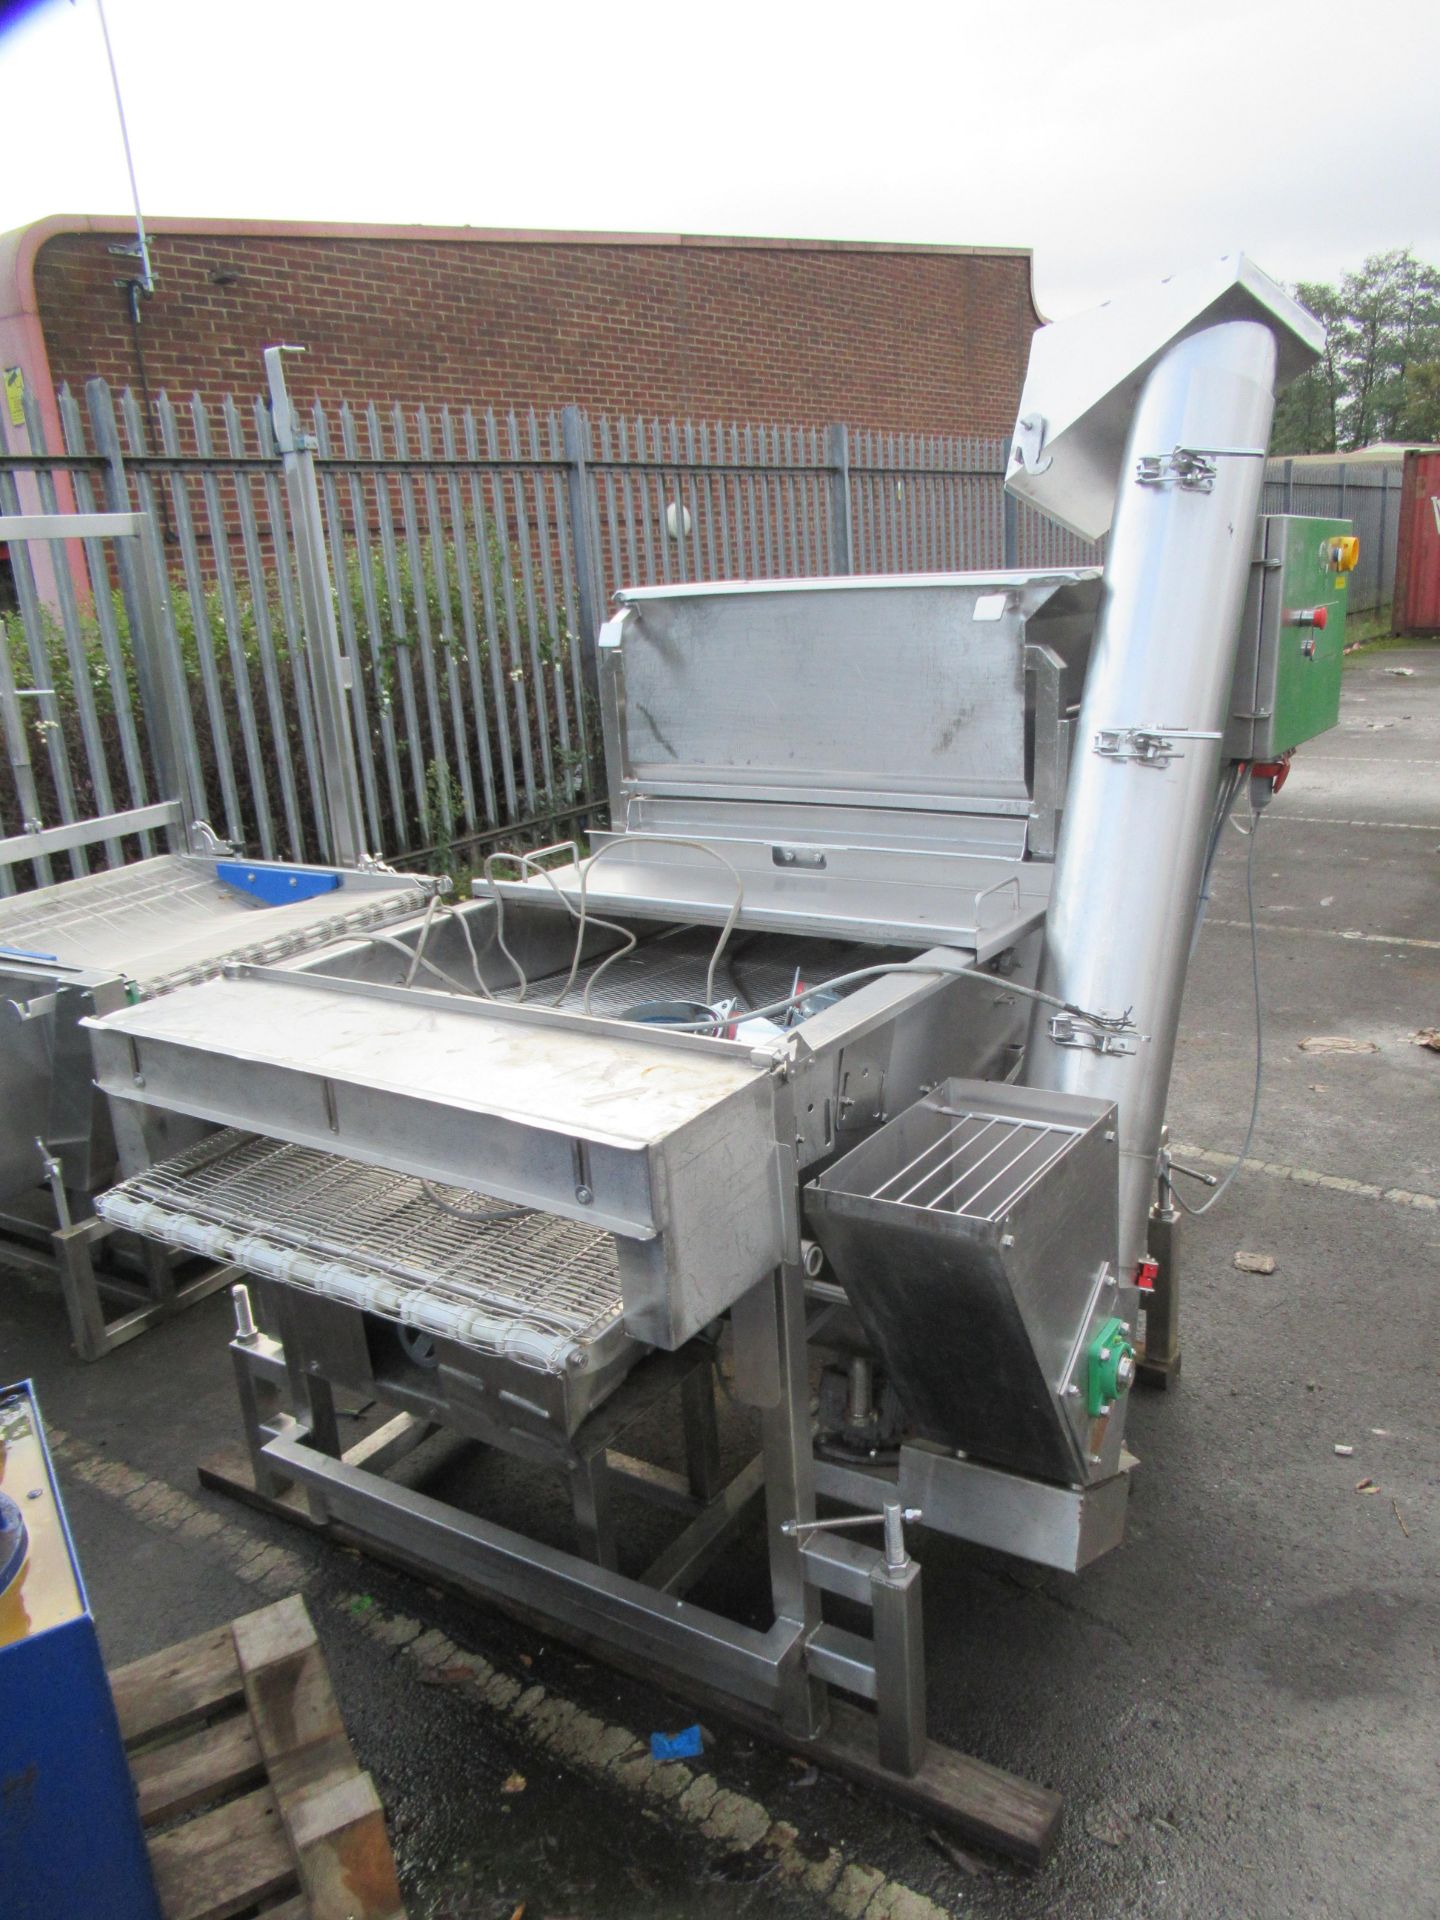 Commercial Catering Stainless Steel Coneyor with Fitted Screw Auger Spairs/Repairs - Image 2 of 4